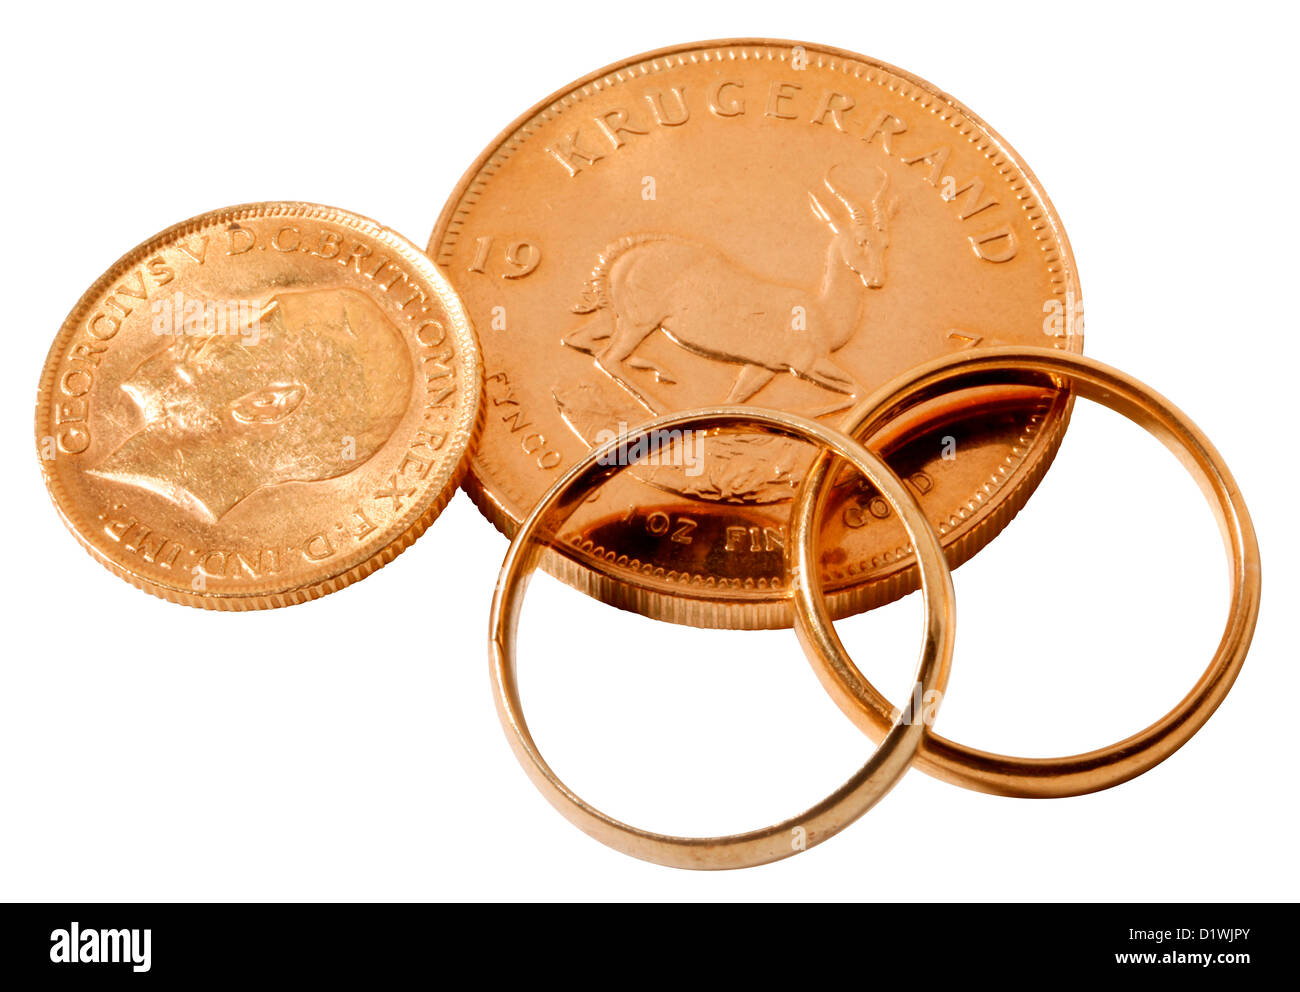 GOLD KRUGERRAND, GOLD SOVEREIGN COINS AND WEDDING RINGS Stock Photo